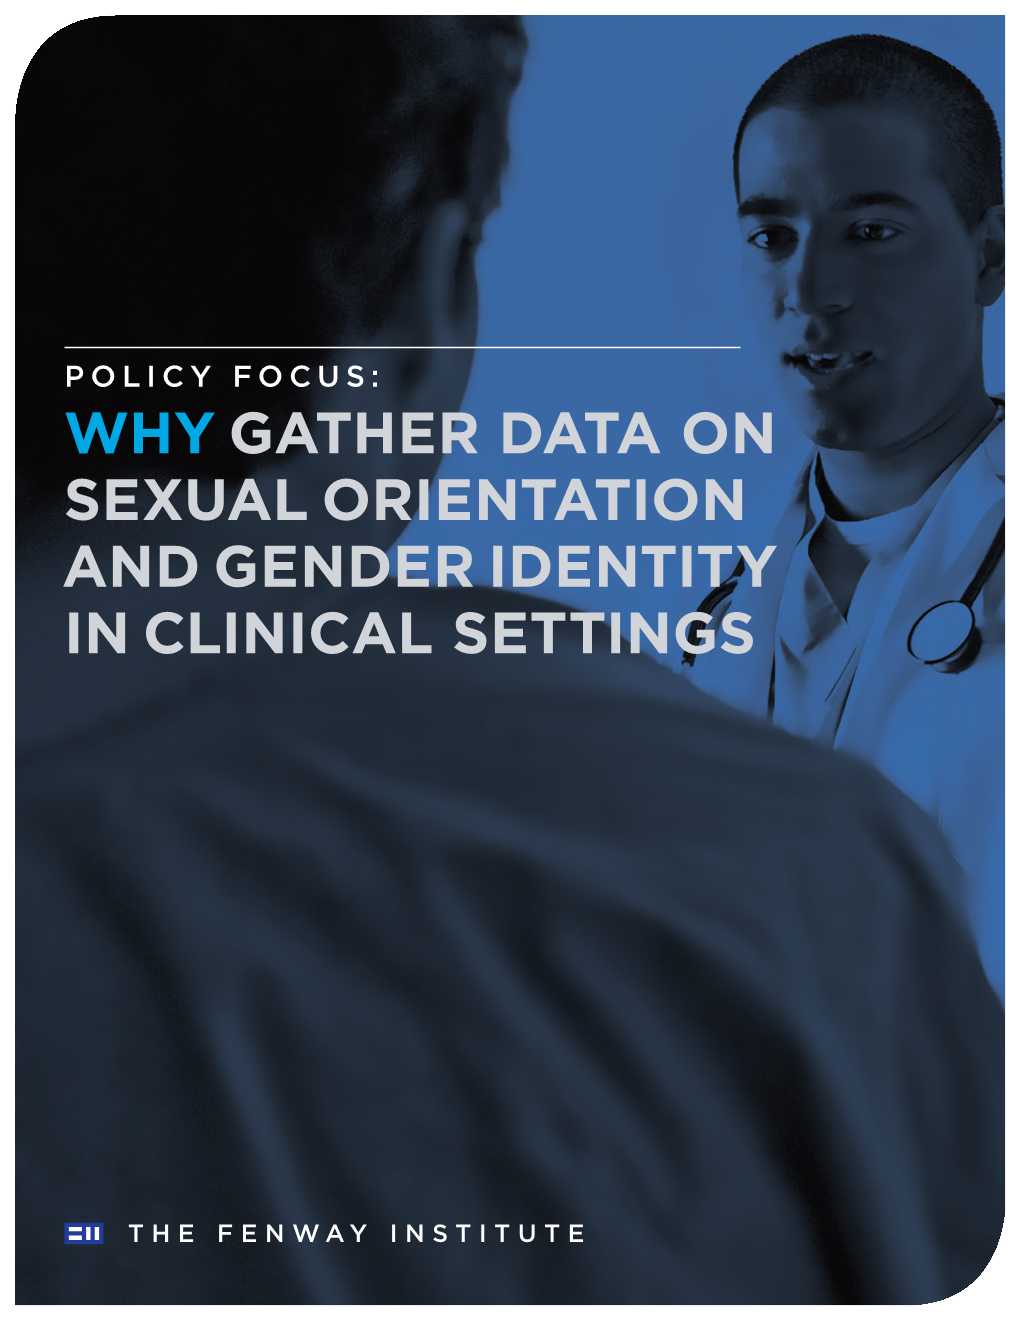 Why Gather Data on Sexual Orientation and Gender Identity in Clinical Settings